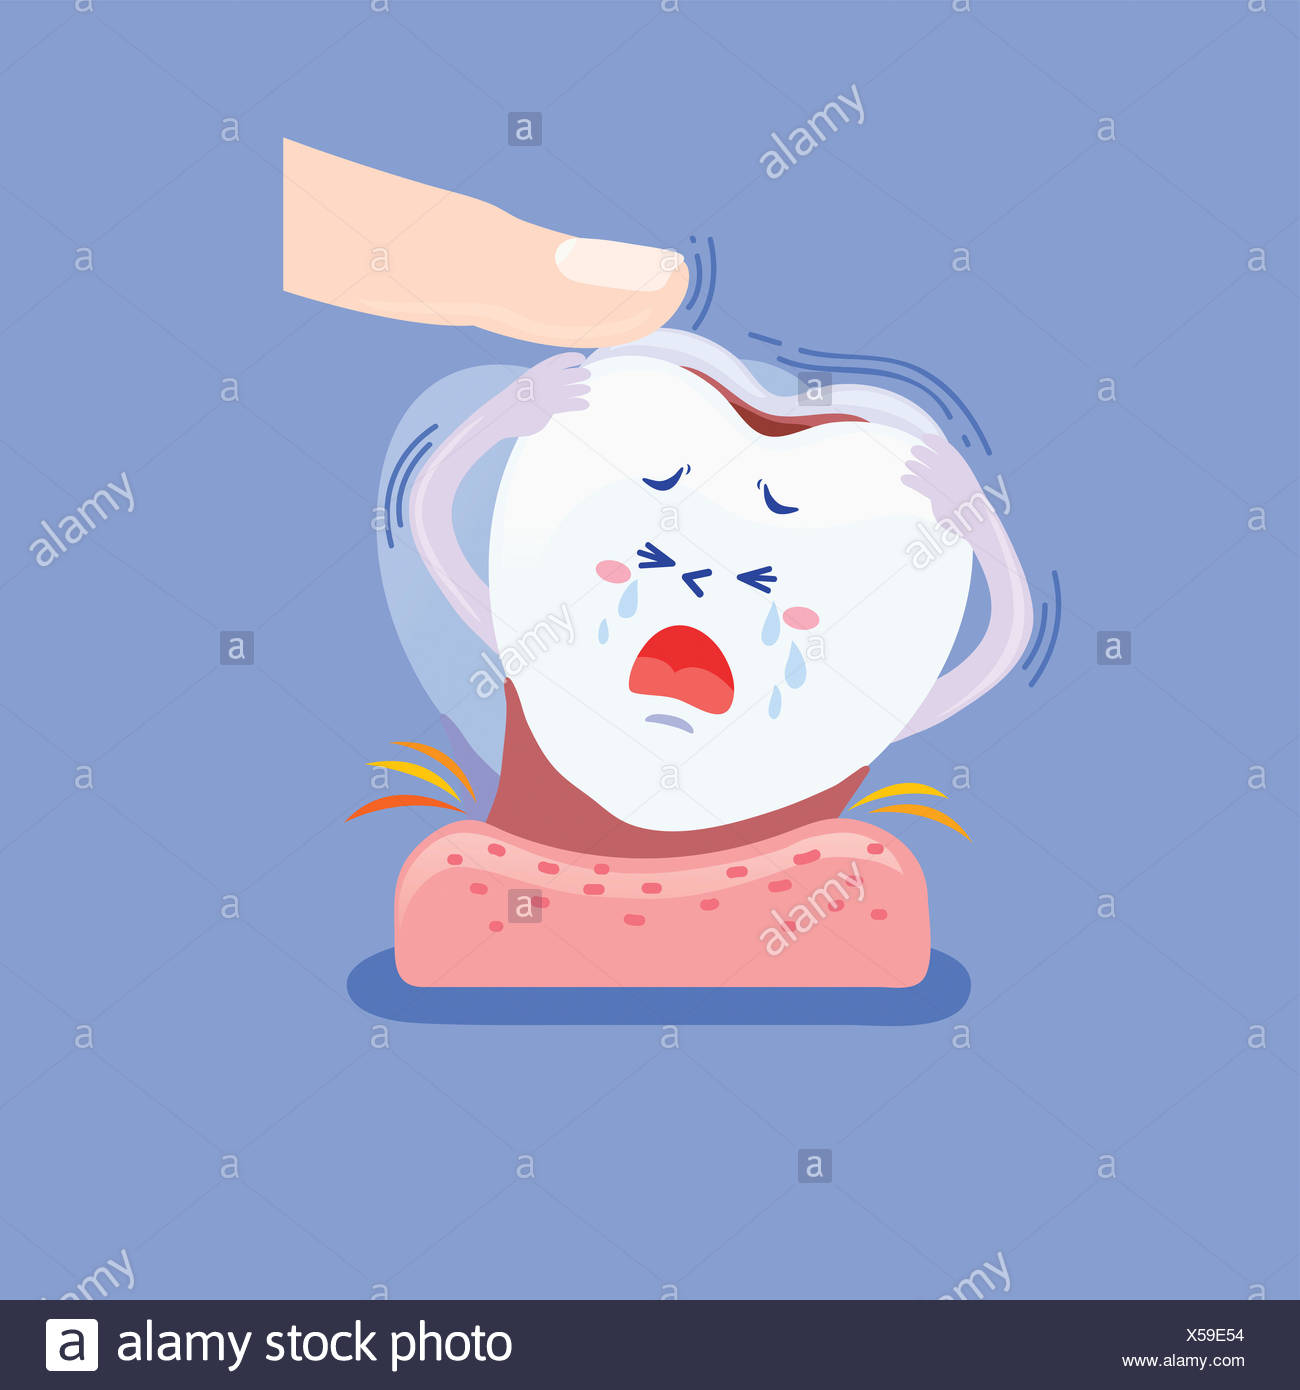 Painful toothache with shaking tooth Stock Photo: 278647856 - Alamy